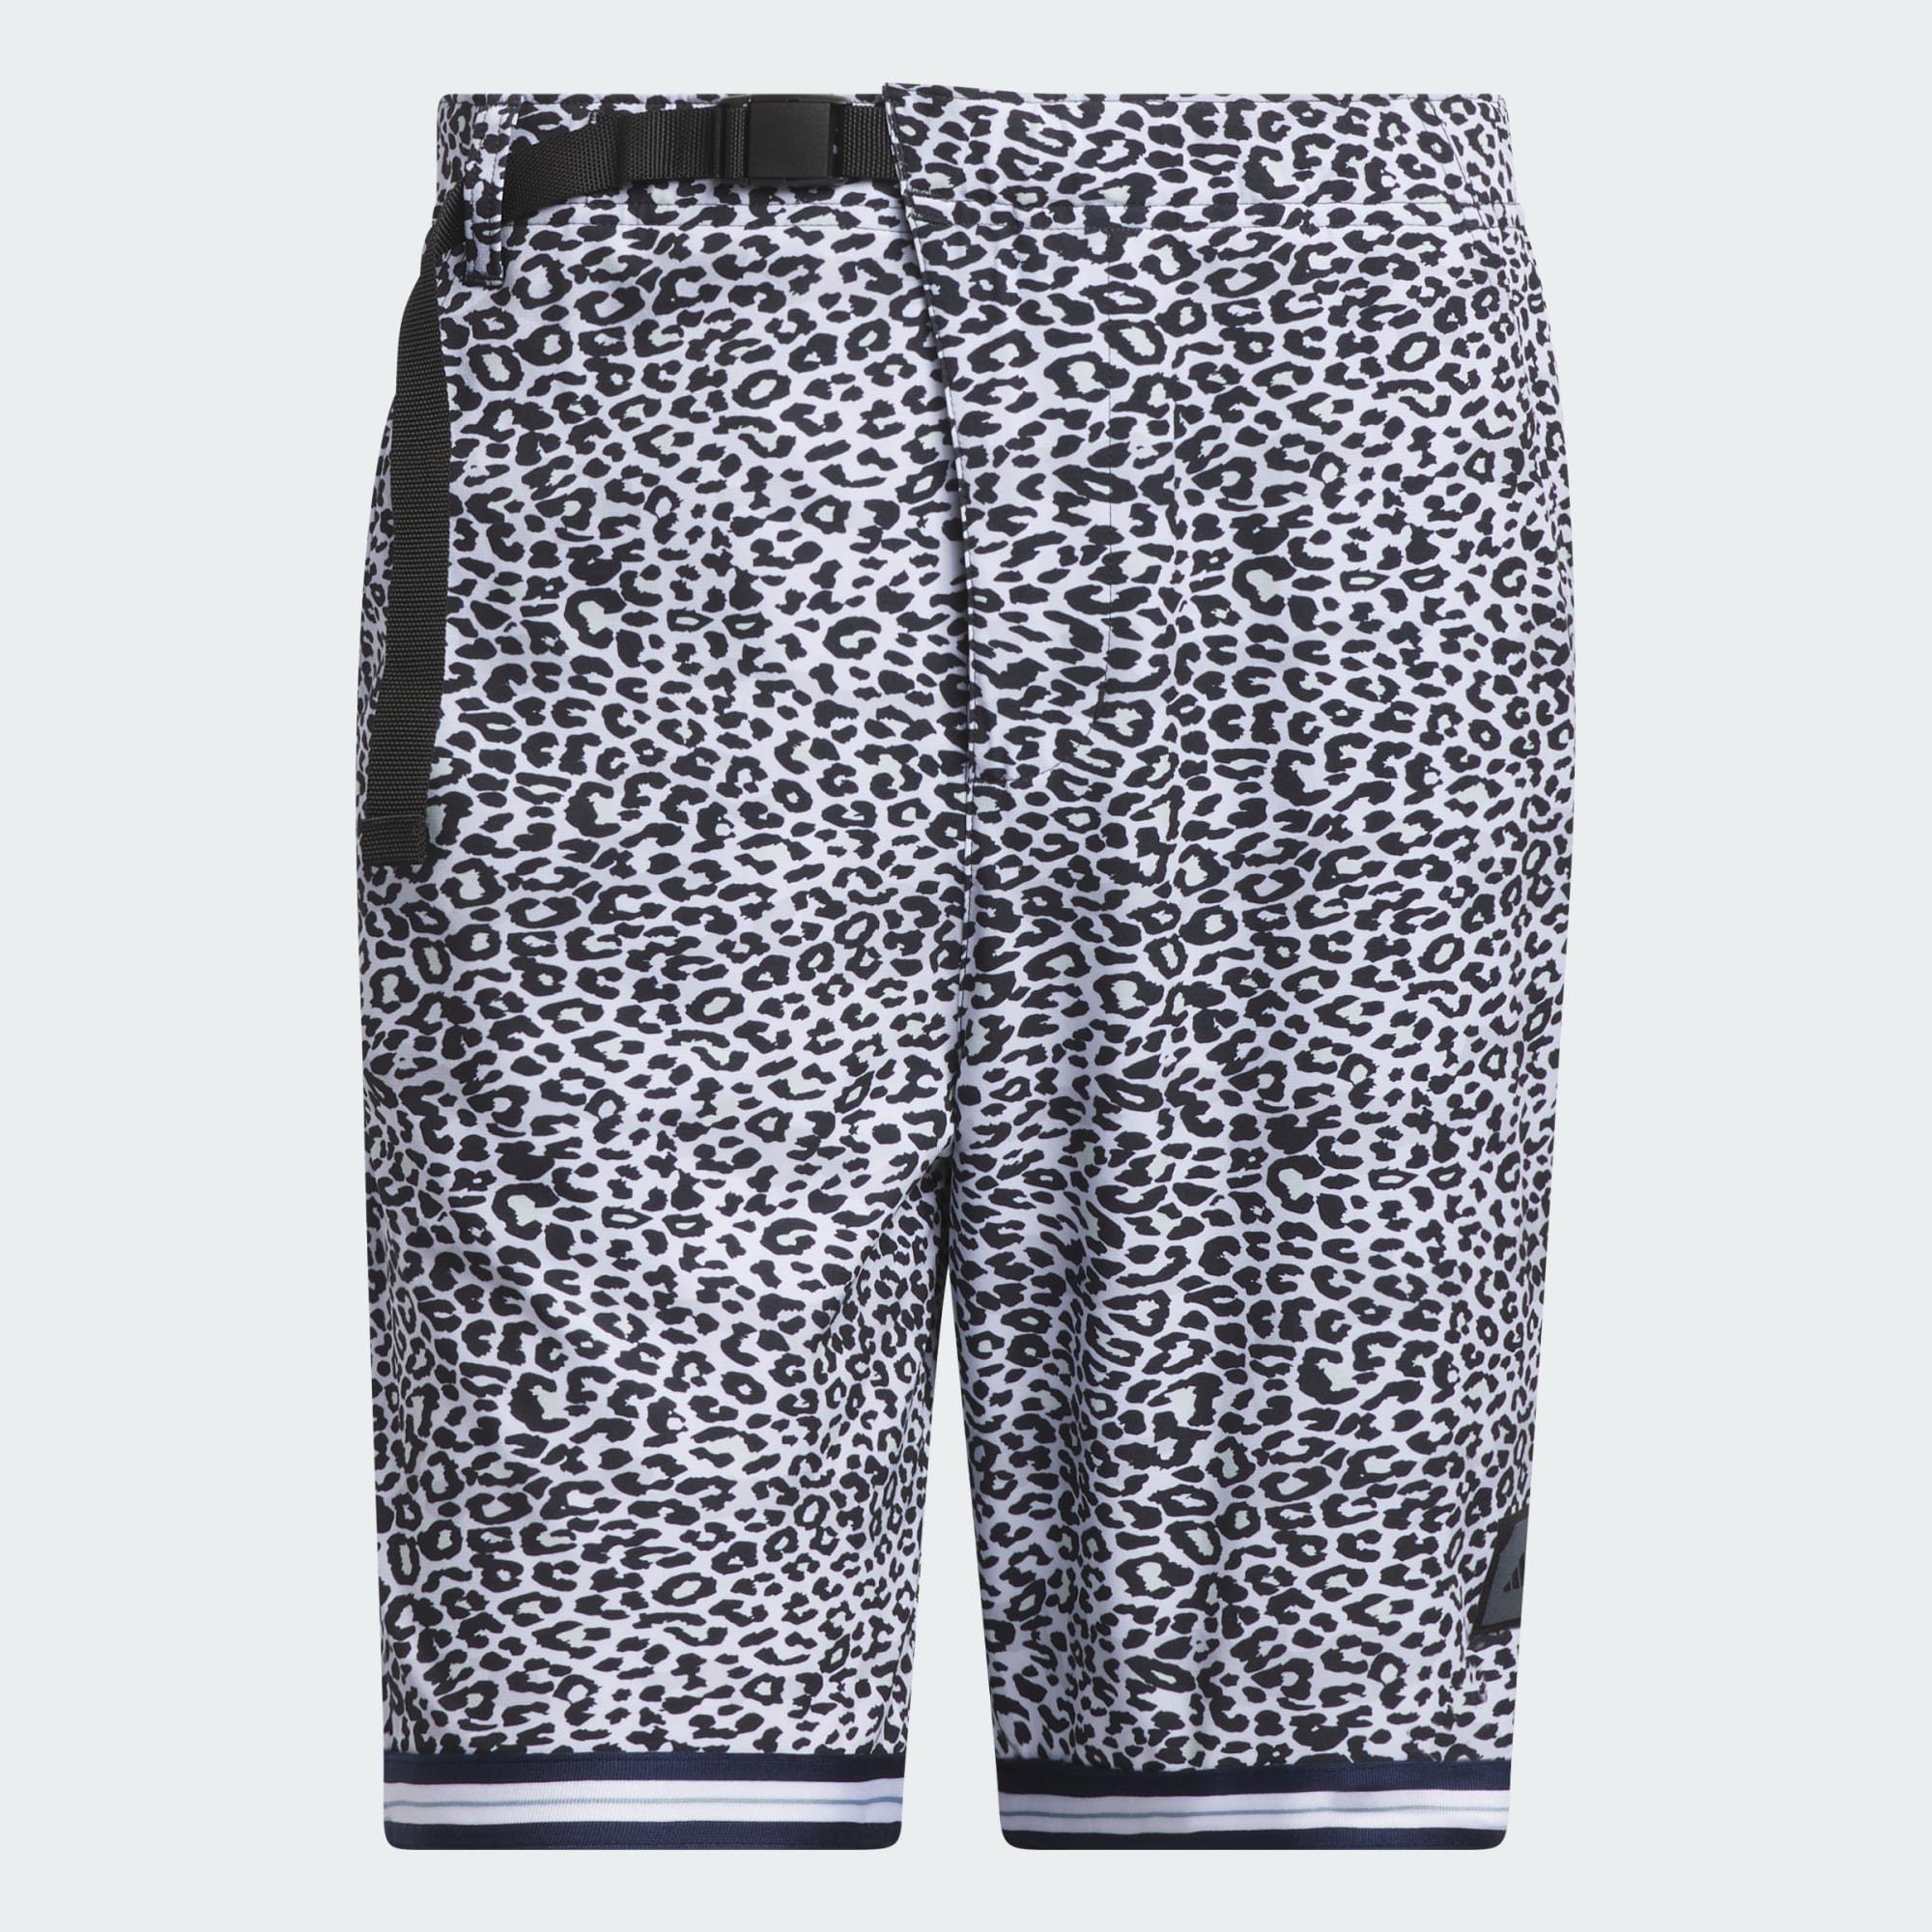 PRINTED Performance Funktionsshorts adidas ADICROSS DELIVERY SHORTS